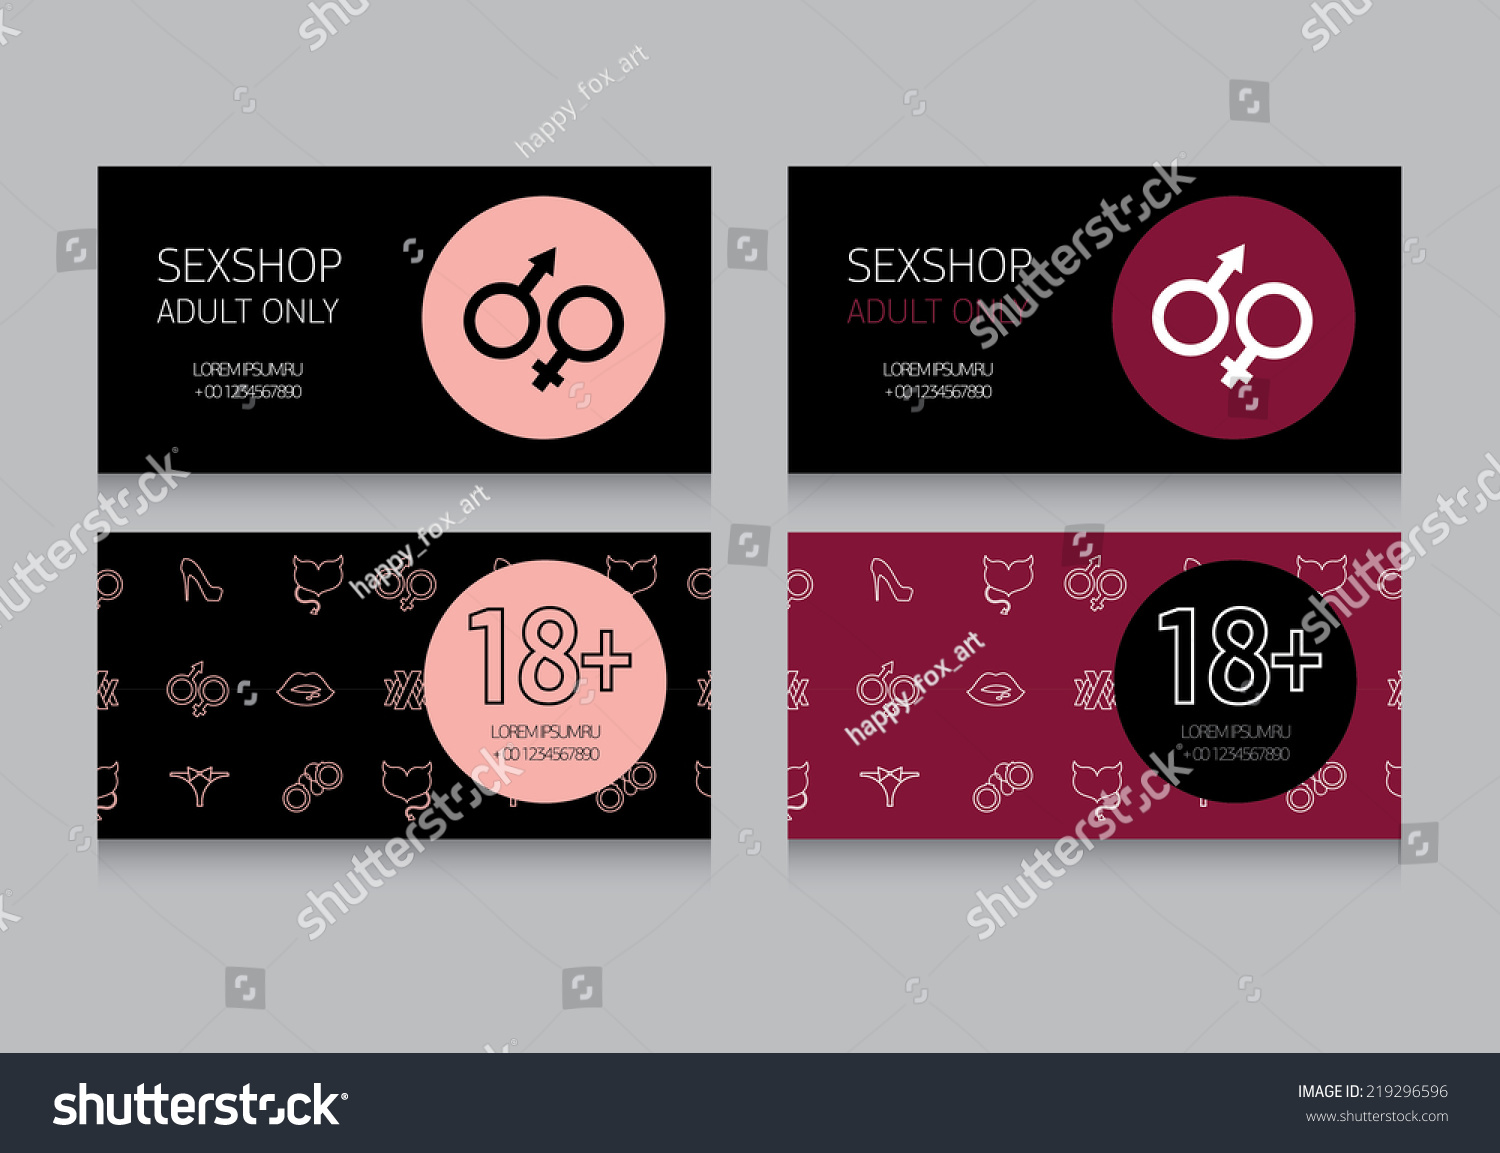 Set Templates Sex Shop Business Cards Stock Vector 219296596 Shutterstock Free Download Nude 5524